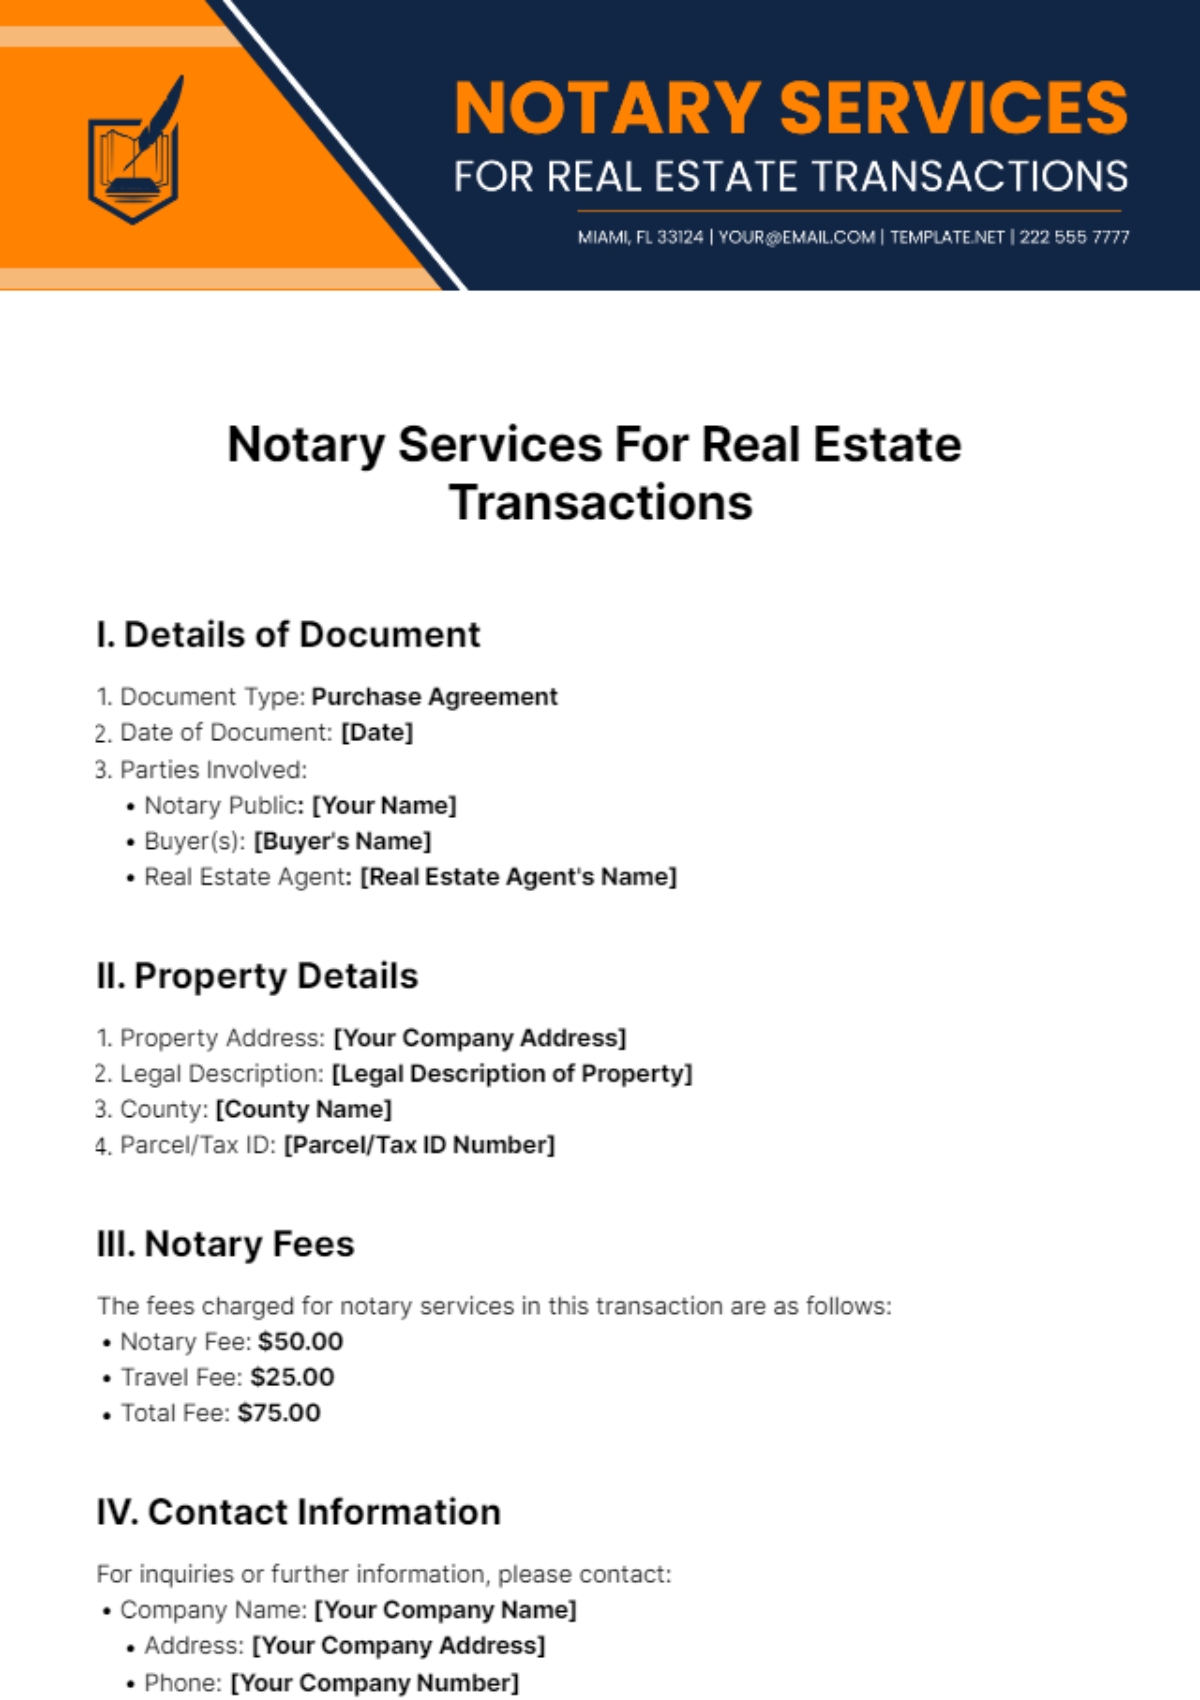 Notary Services for Real Estate Transactions Template